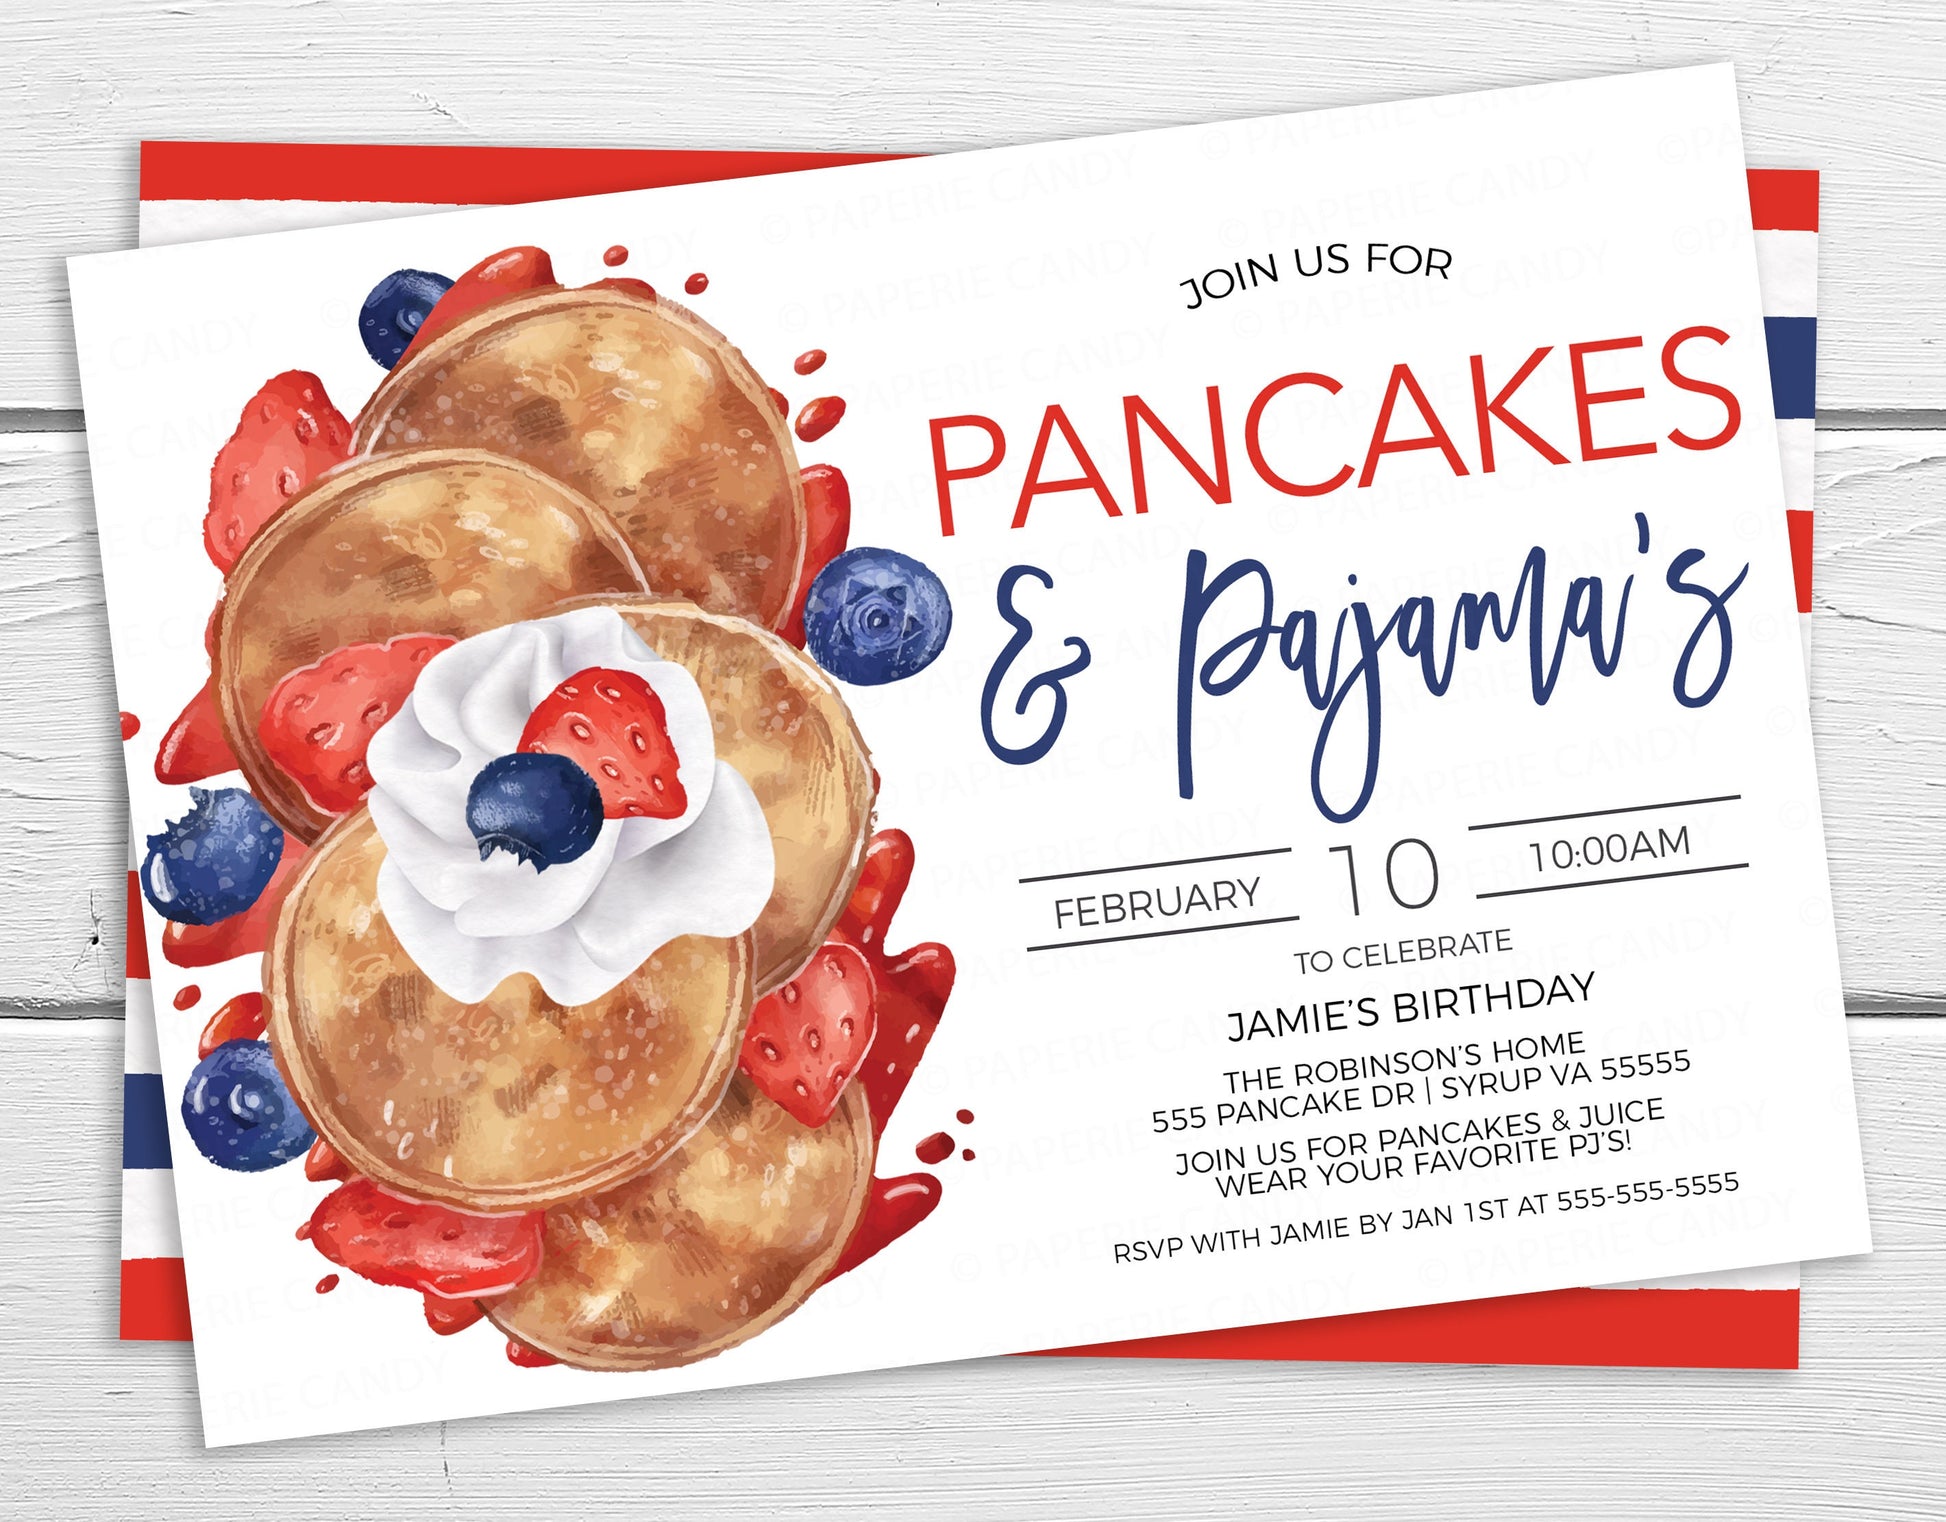 100 Pack Pancake Paper Napkins for Brunch and Pajamas Birthday